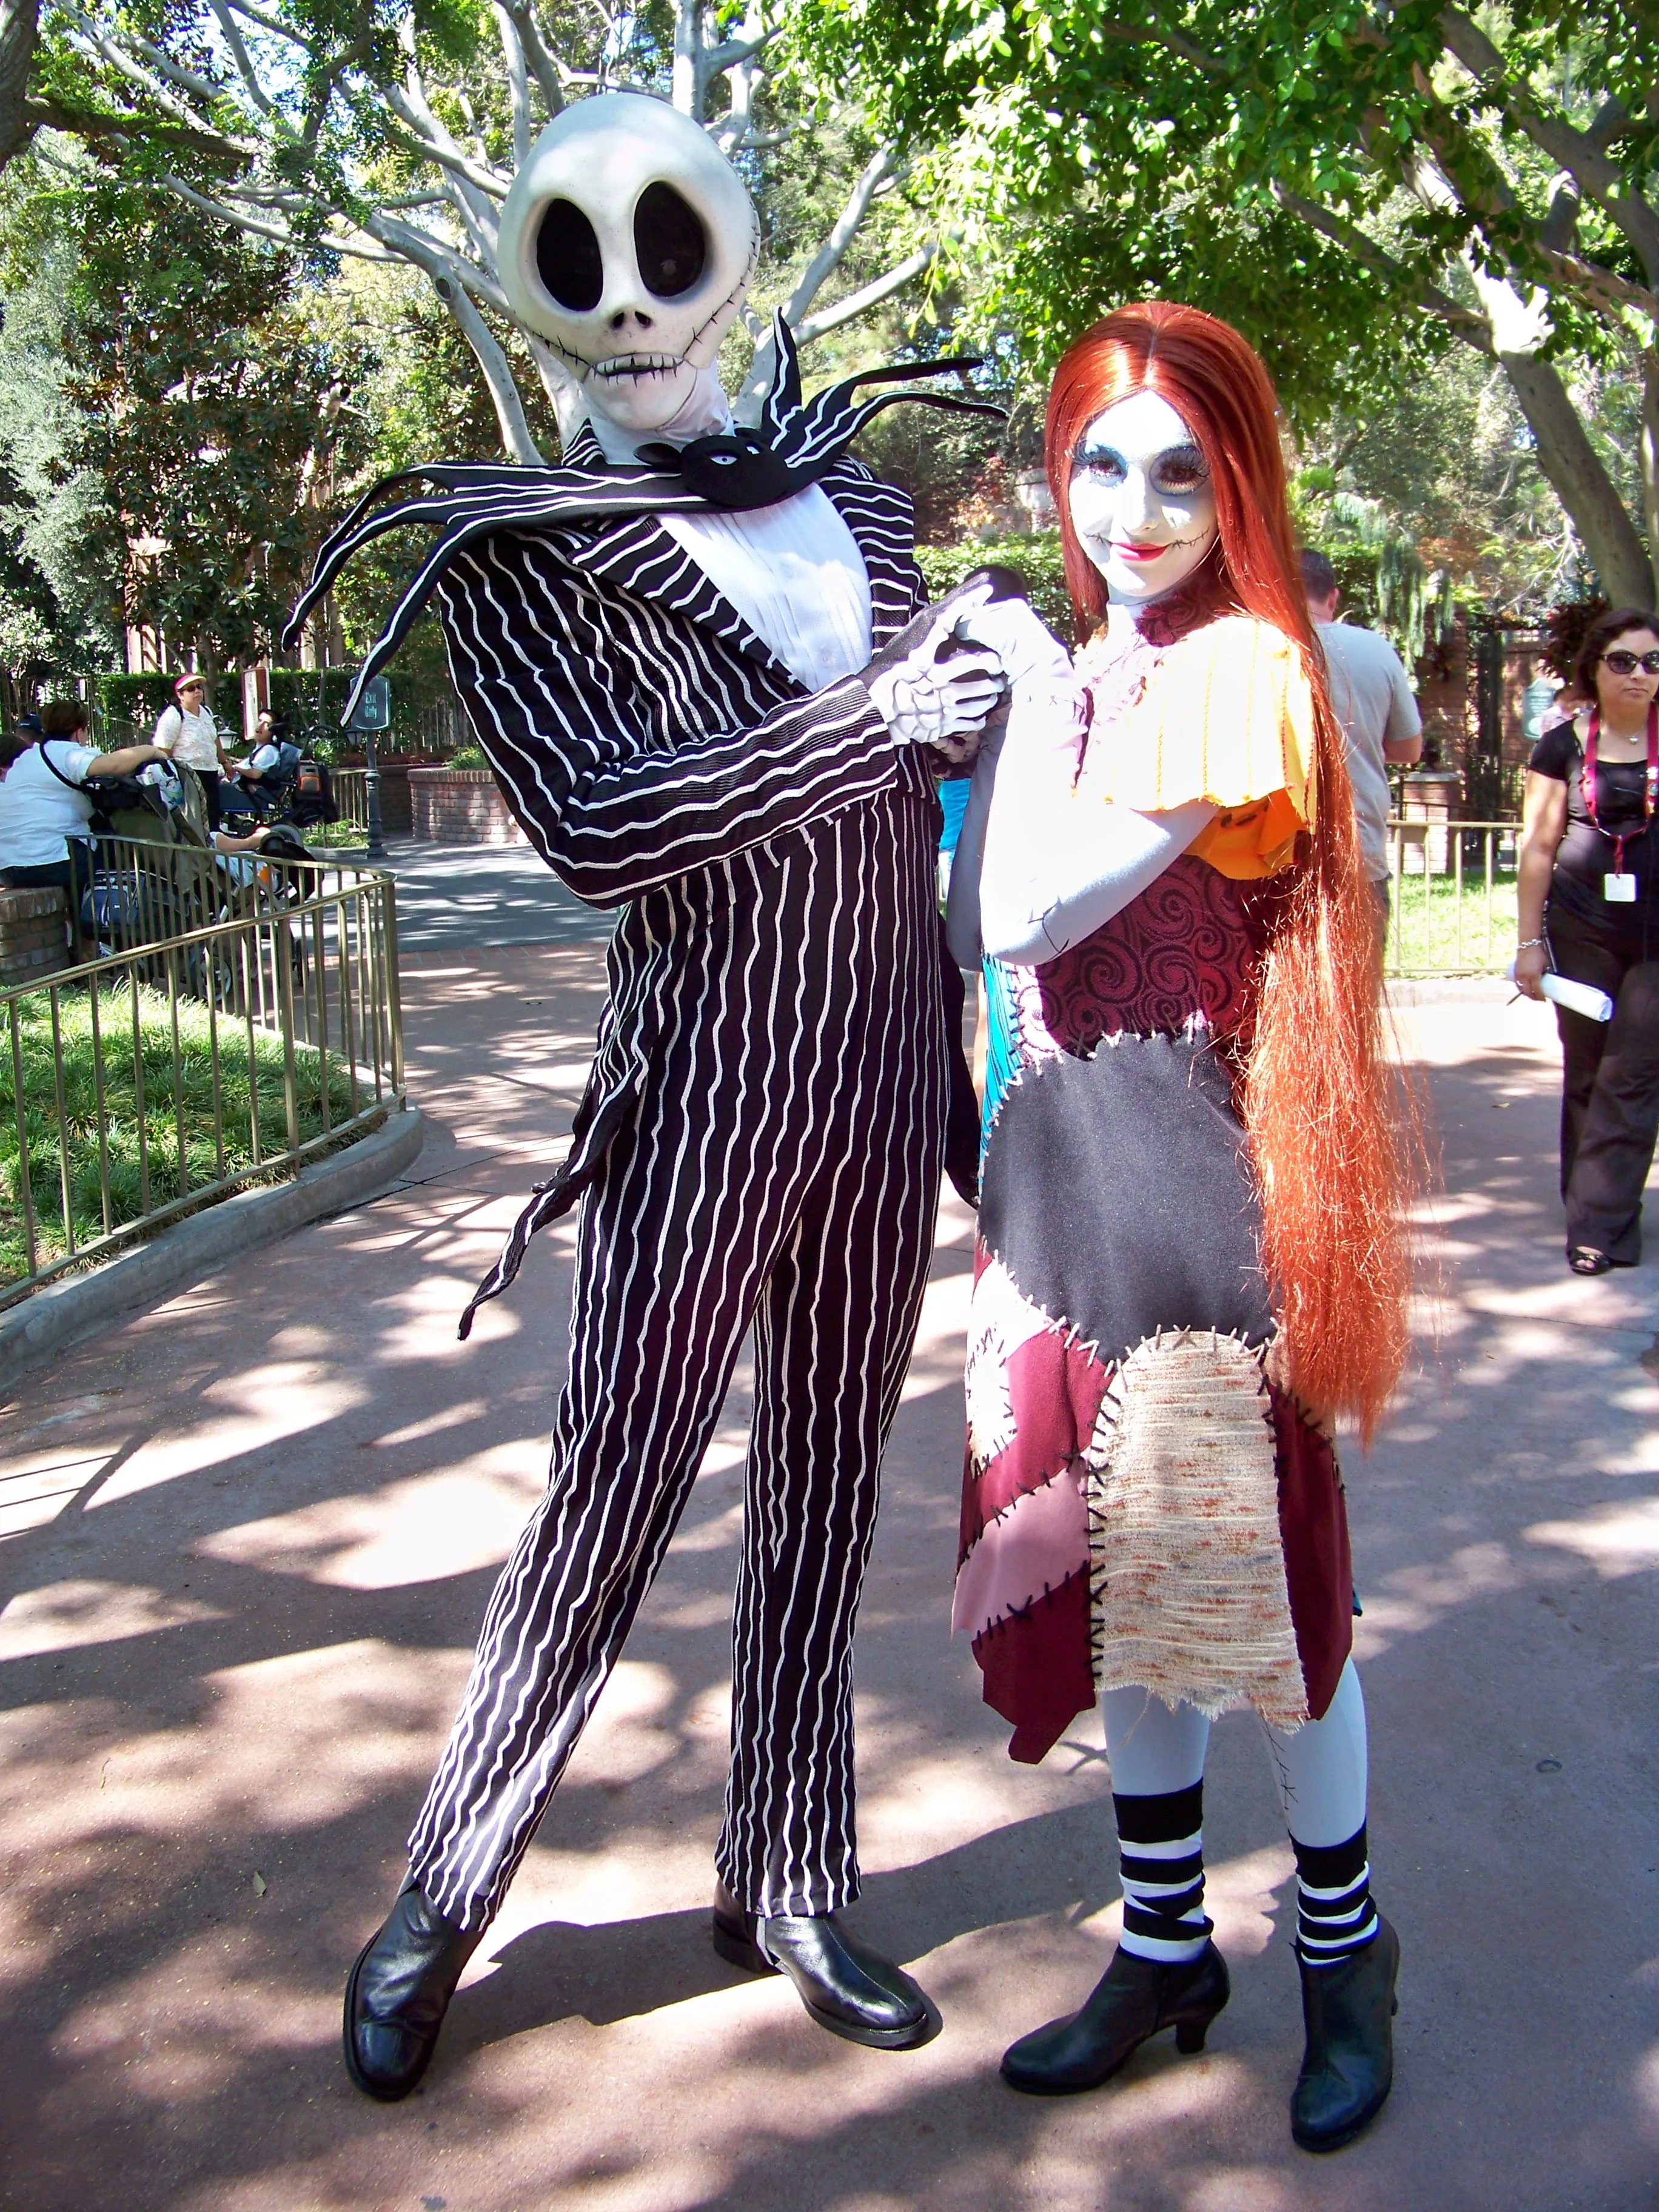 Jack Skellington and Sally in New Orleans Square | Flickr - Photo ...